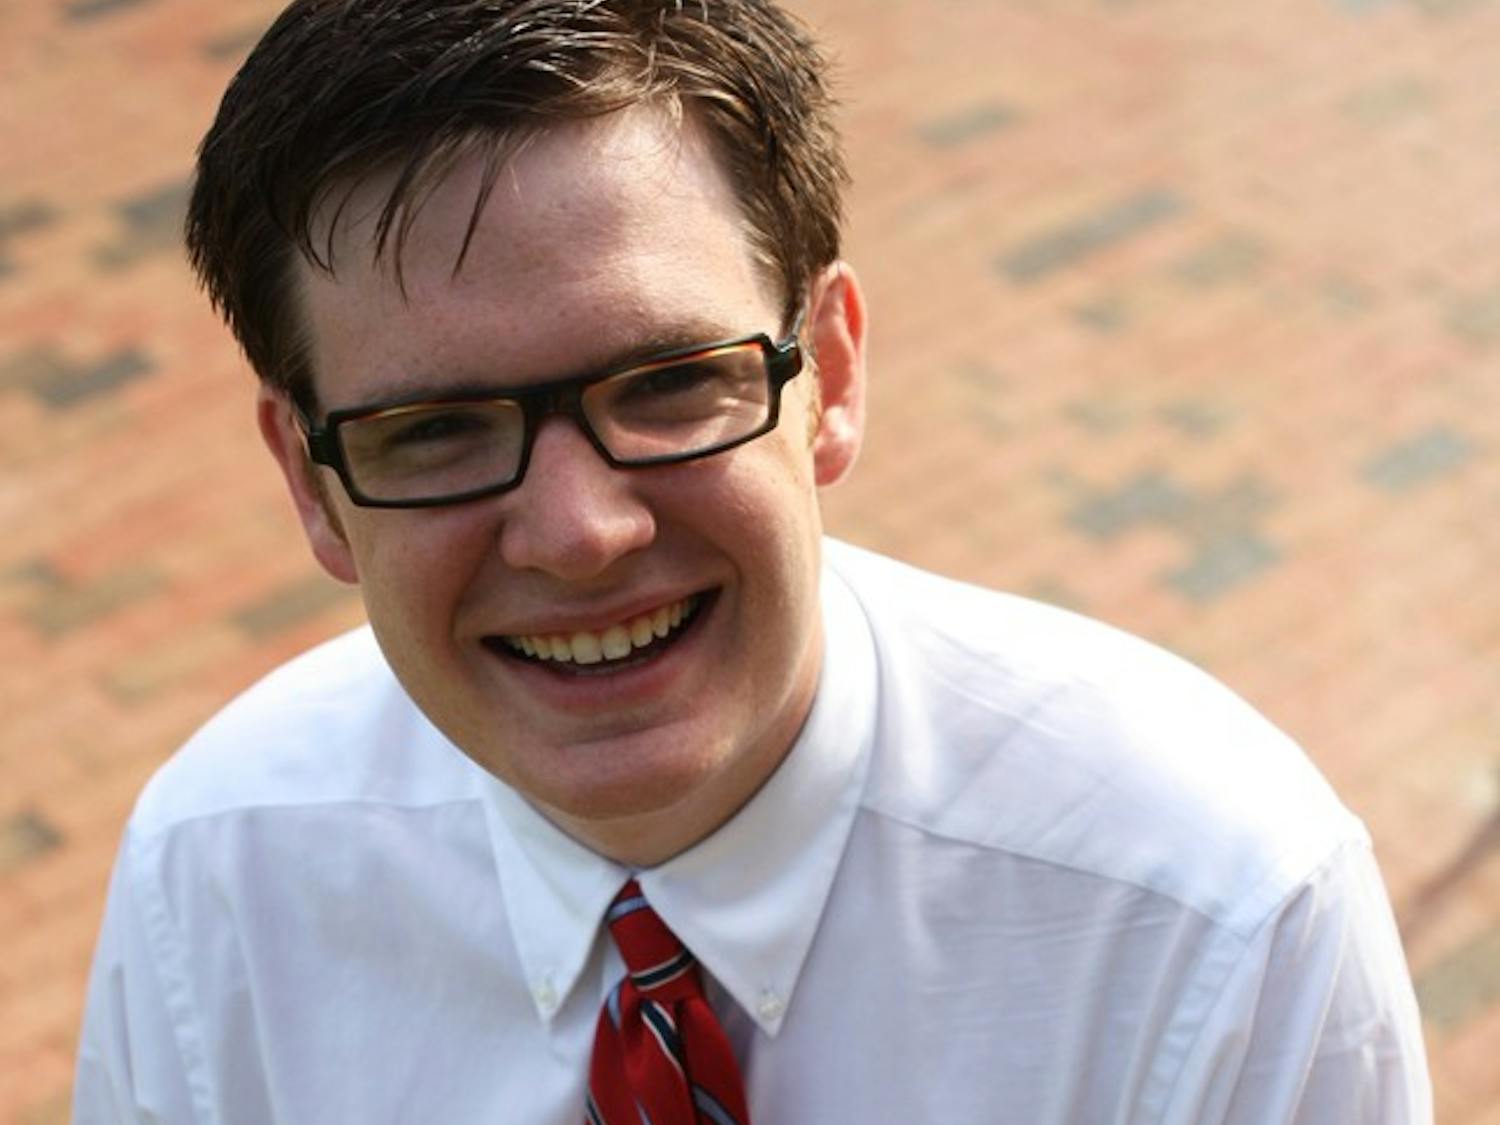 Photo: Lee Storrow brings youth to Chapel Hill Town Council race (Erin Hull)